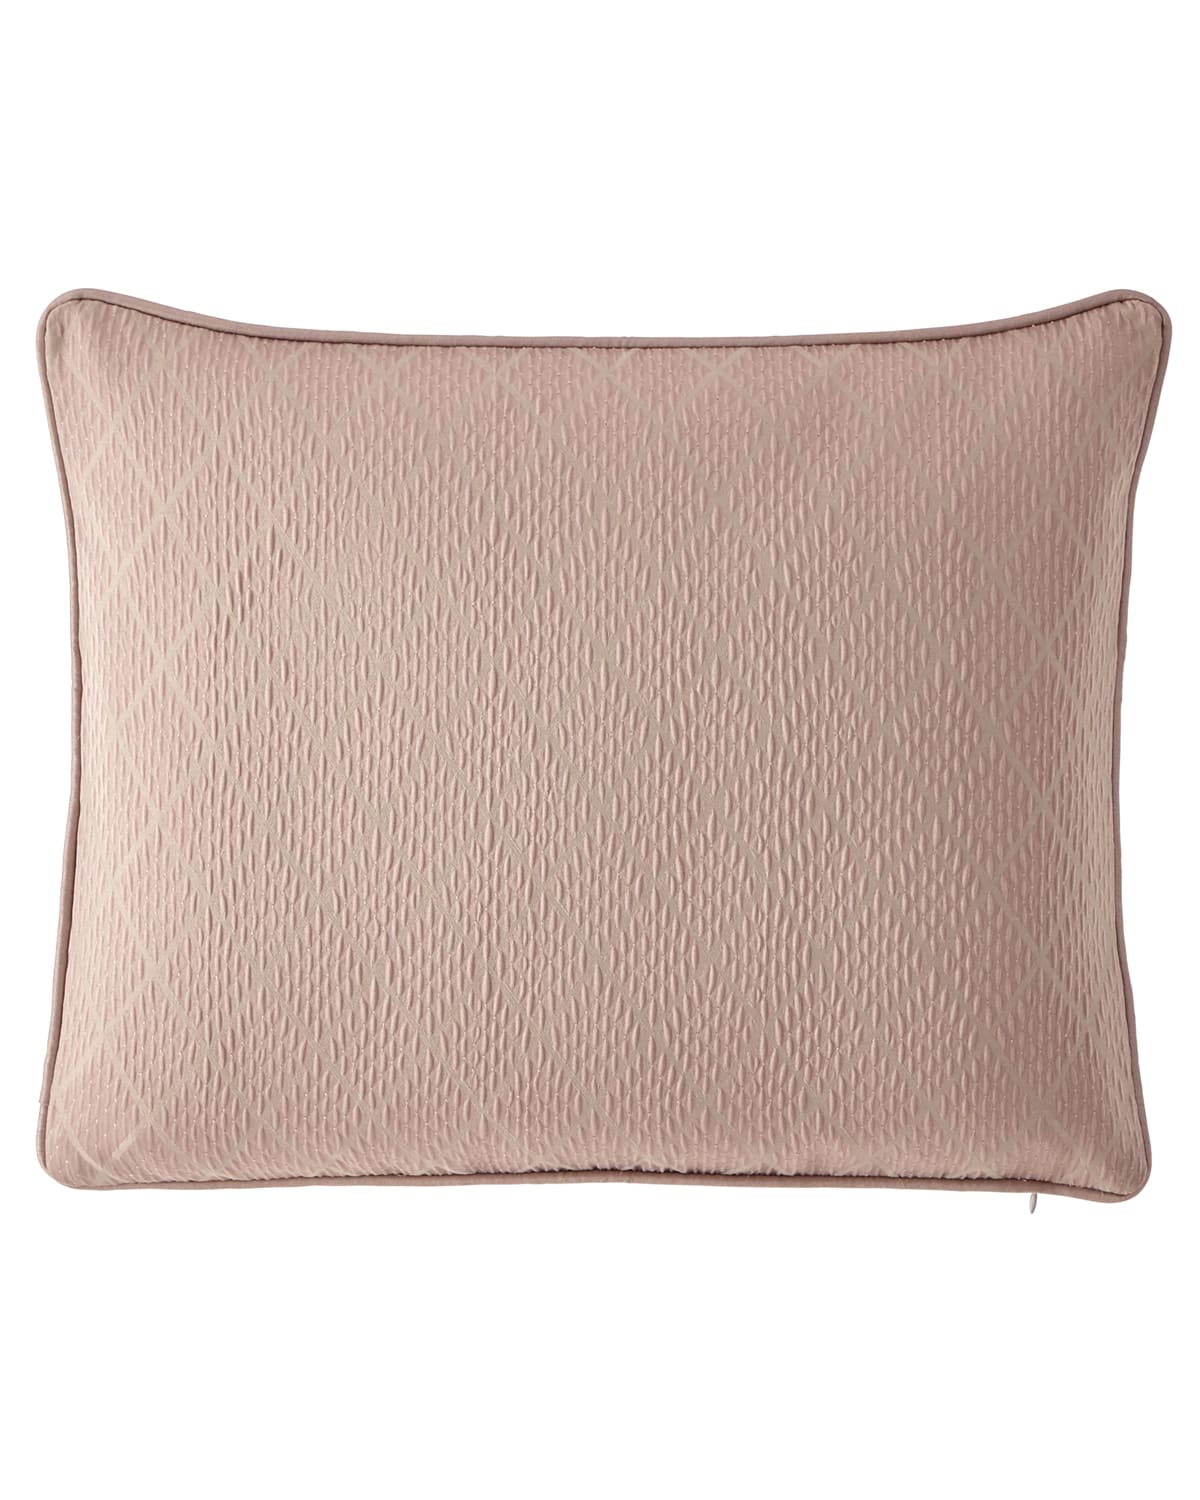 Image Waterford Victoria Orchid Decorative Pillow, 16" x 20"